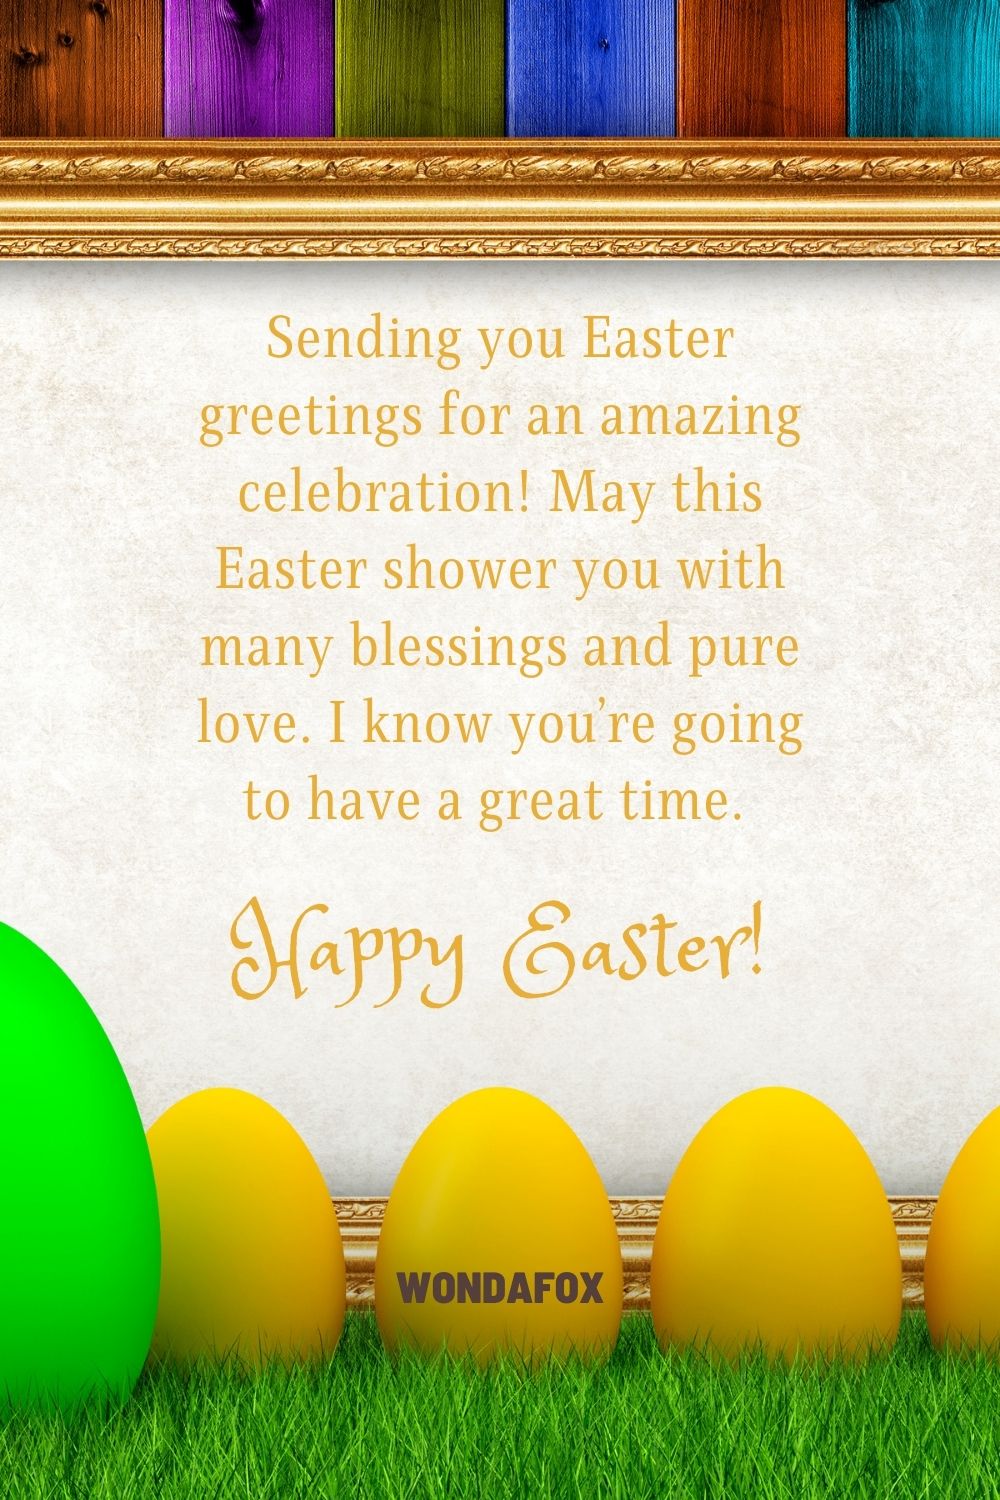 Sending you Easter greetings for an amazing celebration! May this Easter shower you with many blessings and pure love. I know you’re going to have a great time. Happy Easter!